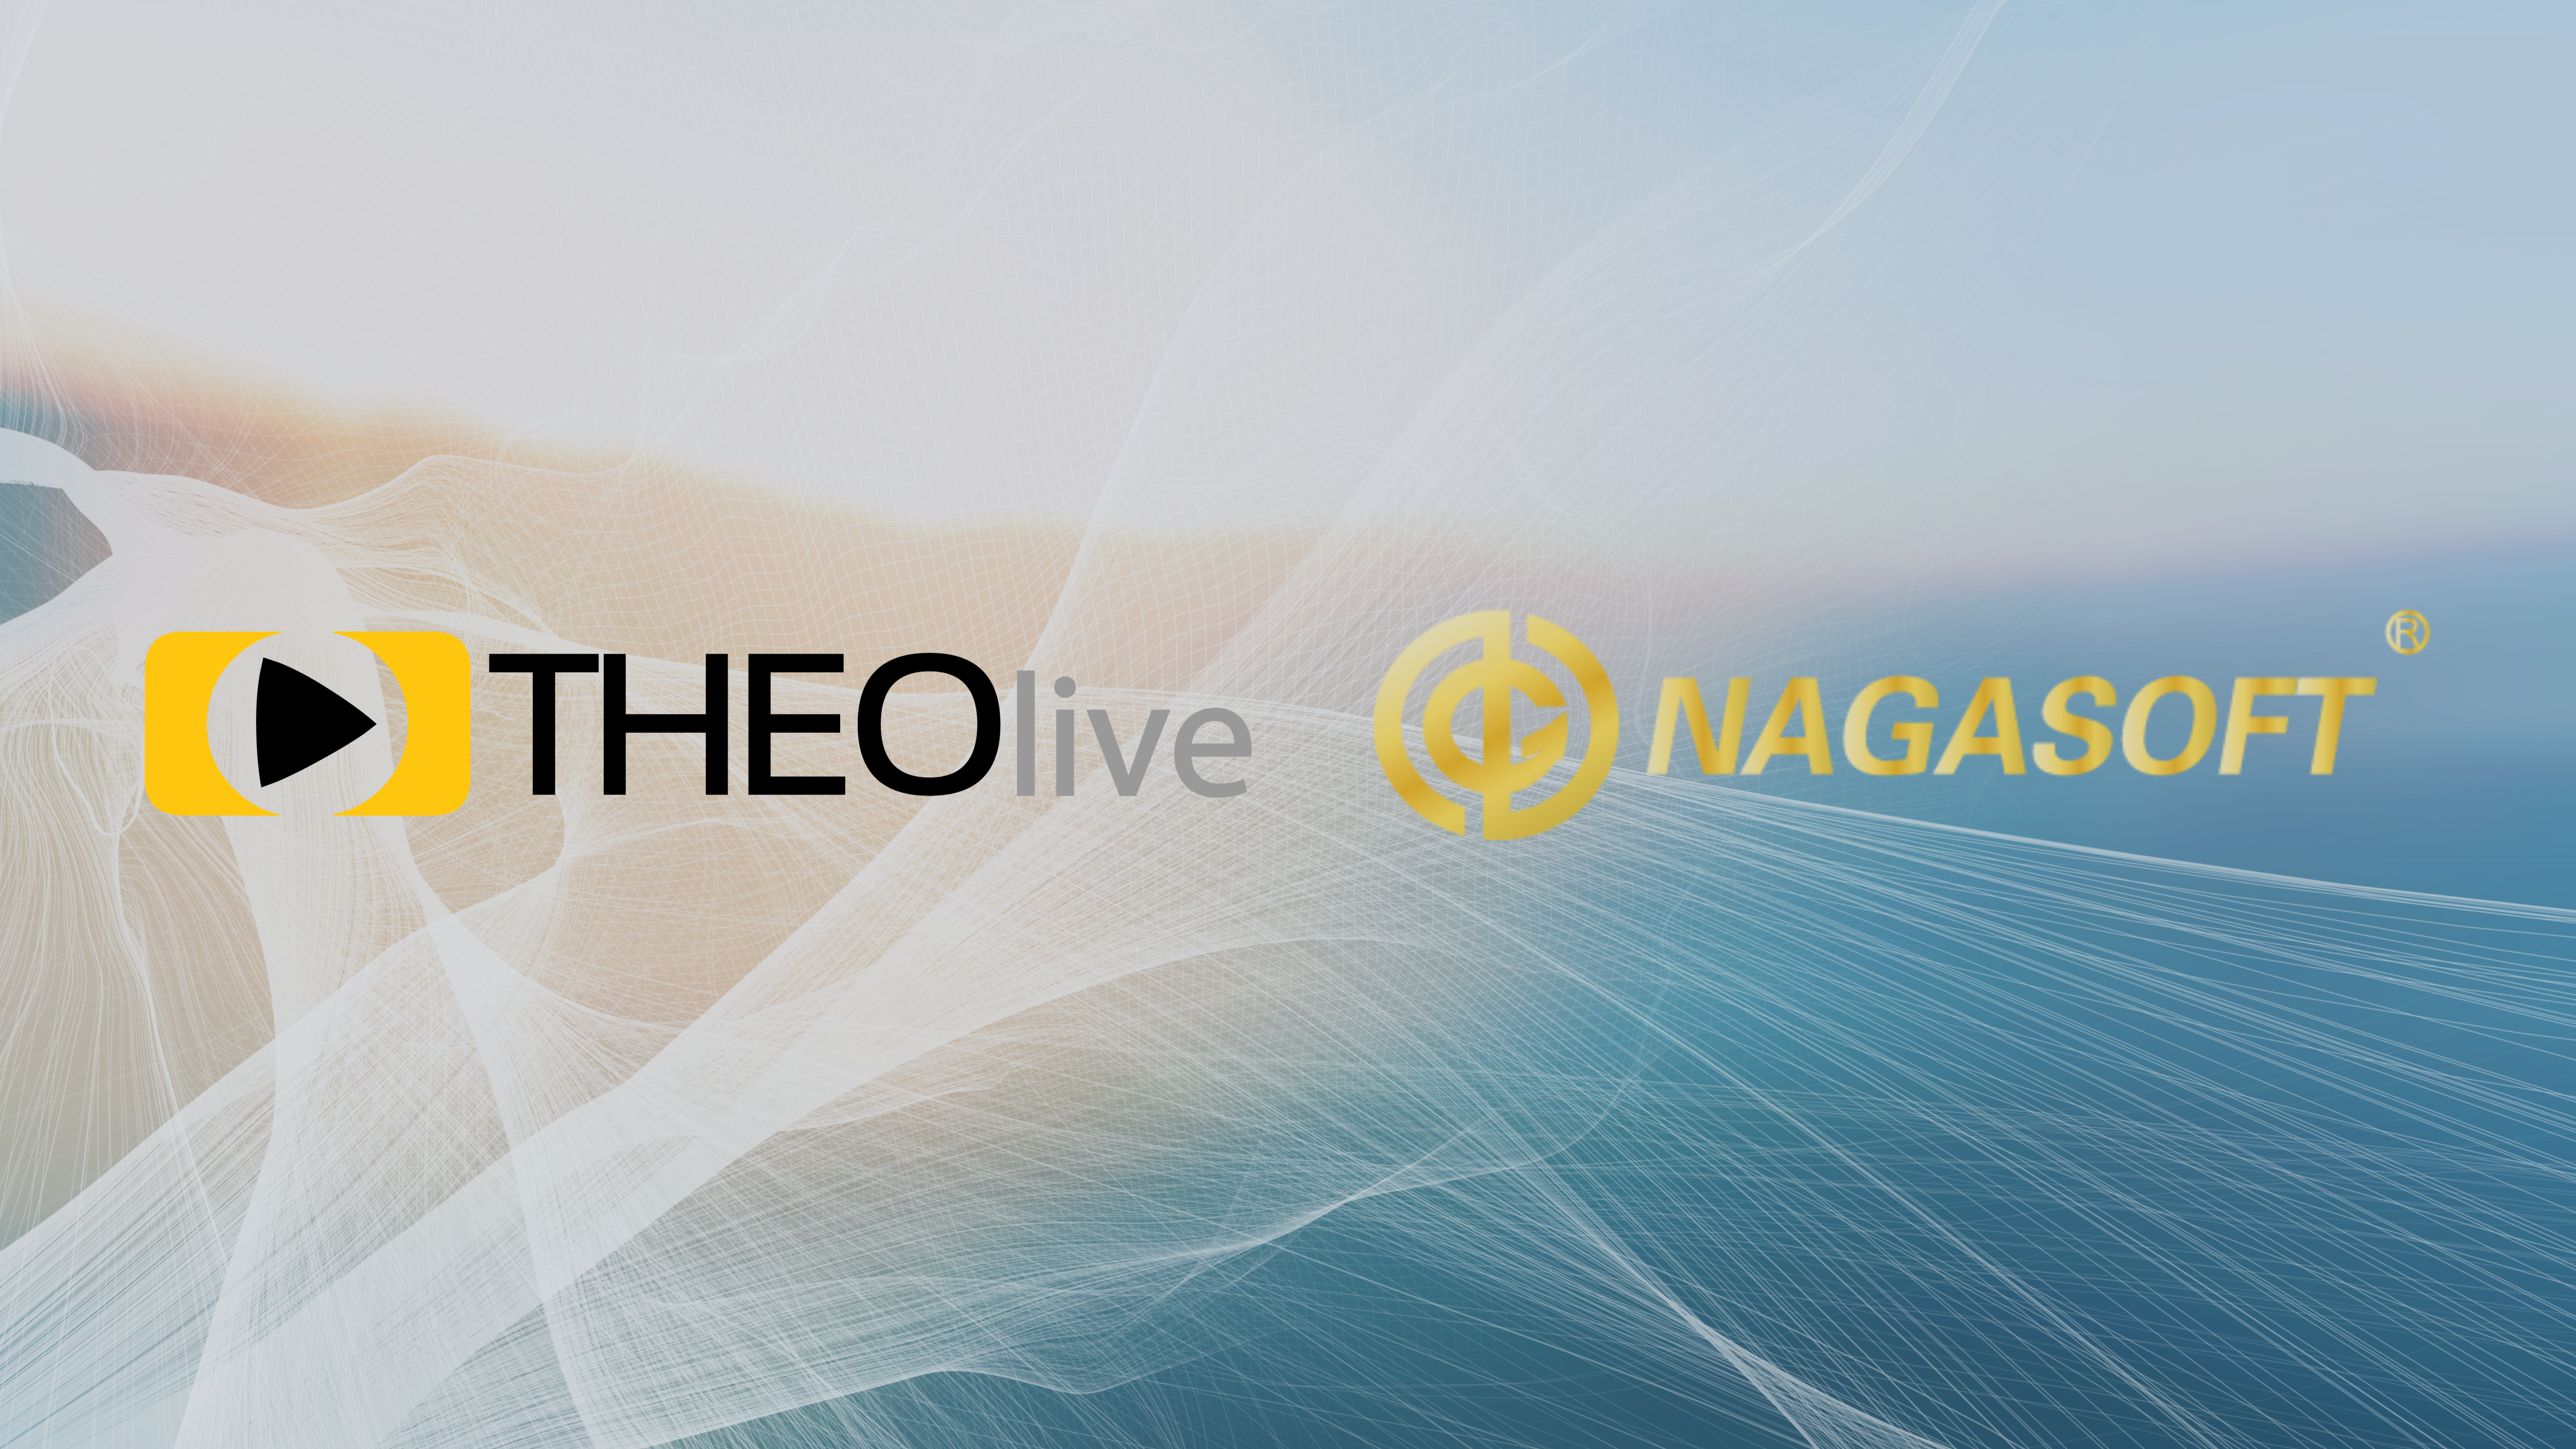 THEOlive now fully integrated with Nagasoft's streaming video switcher tablets